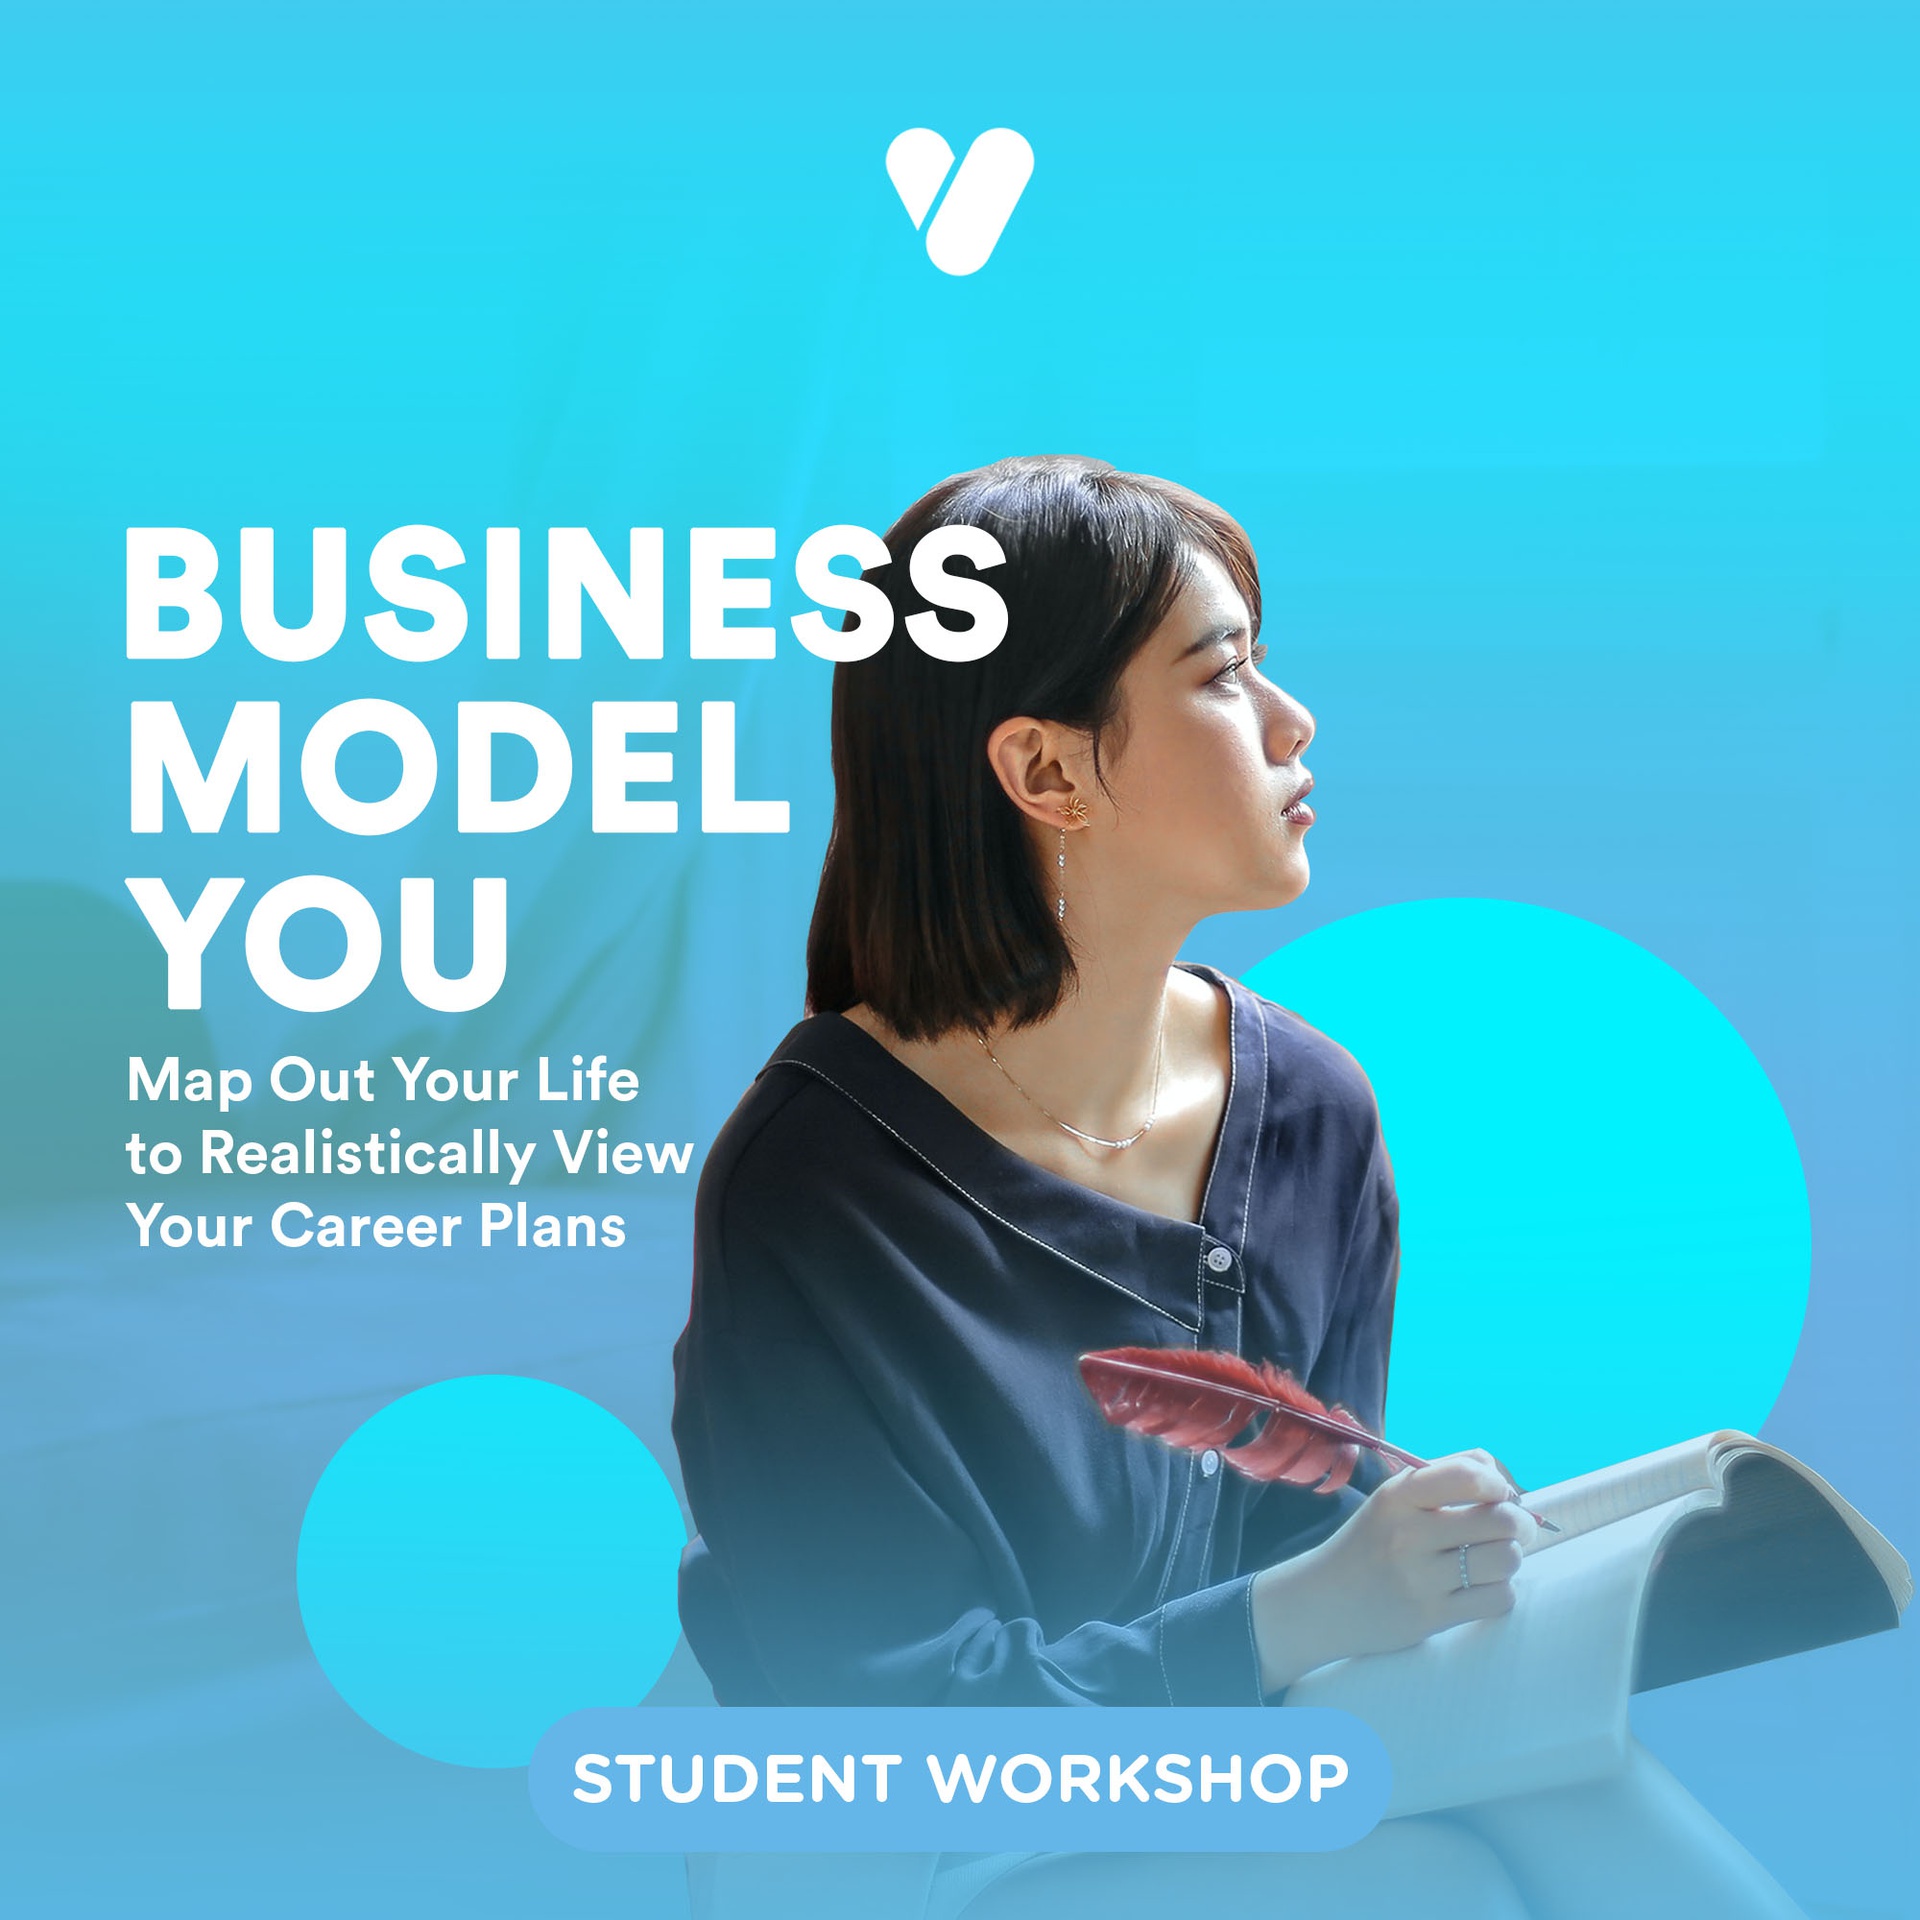 Business Model You: Map out Your Life to Realistically View Your Career Plans